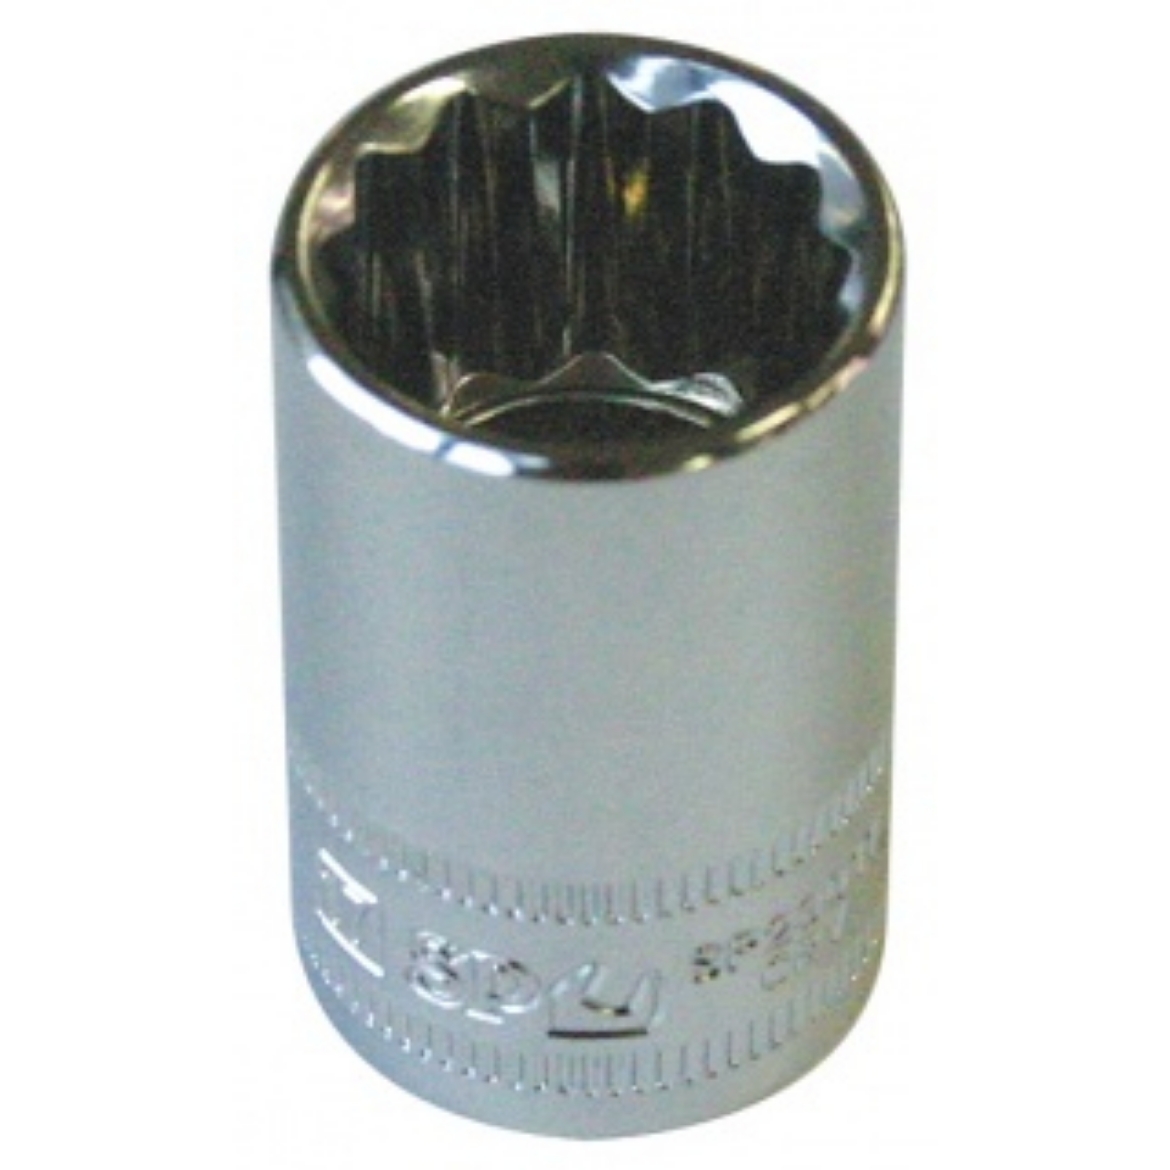 Picture of SOCKET 1/2"DR 12PT METRIC 32MM SP TOOLS